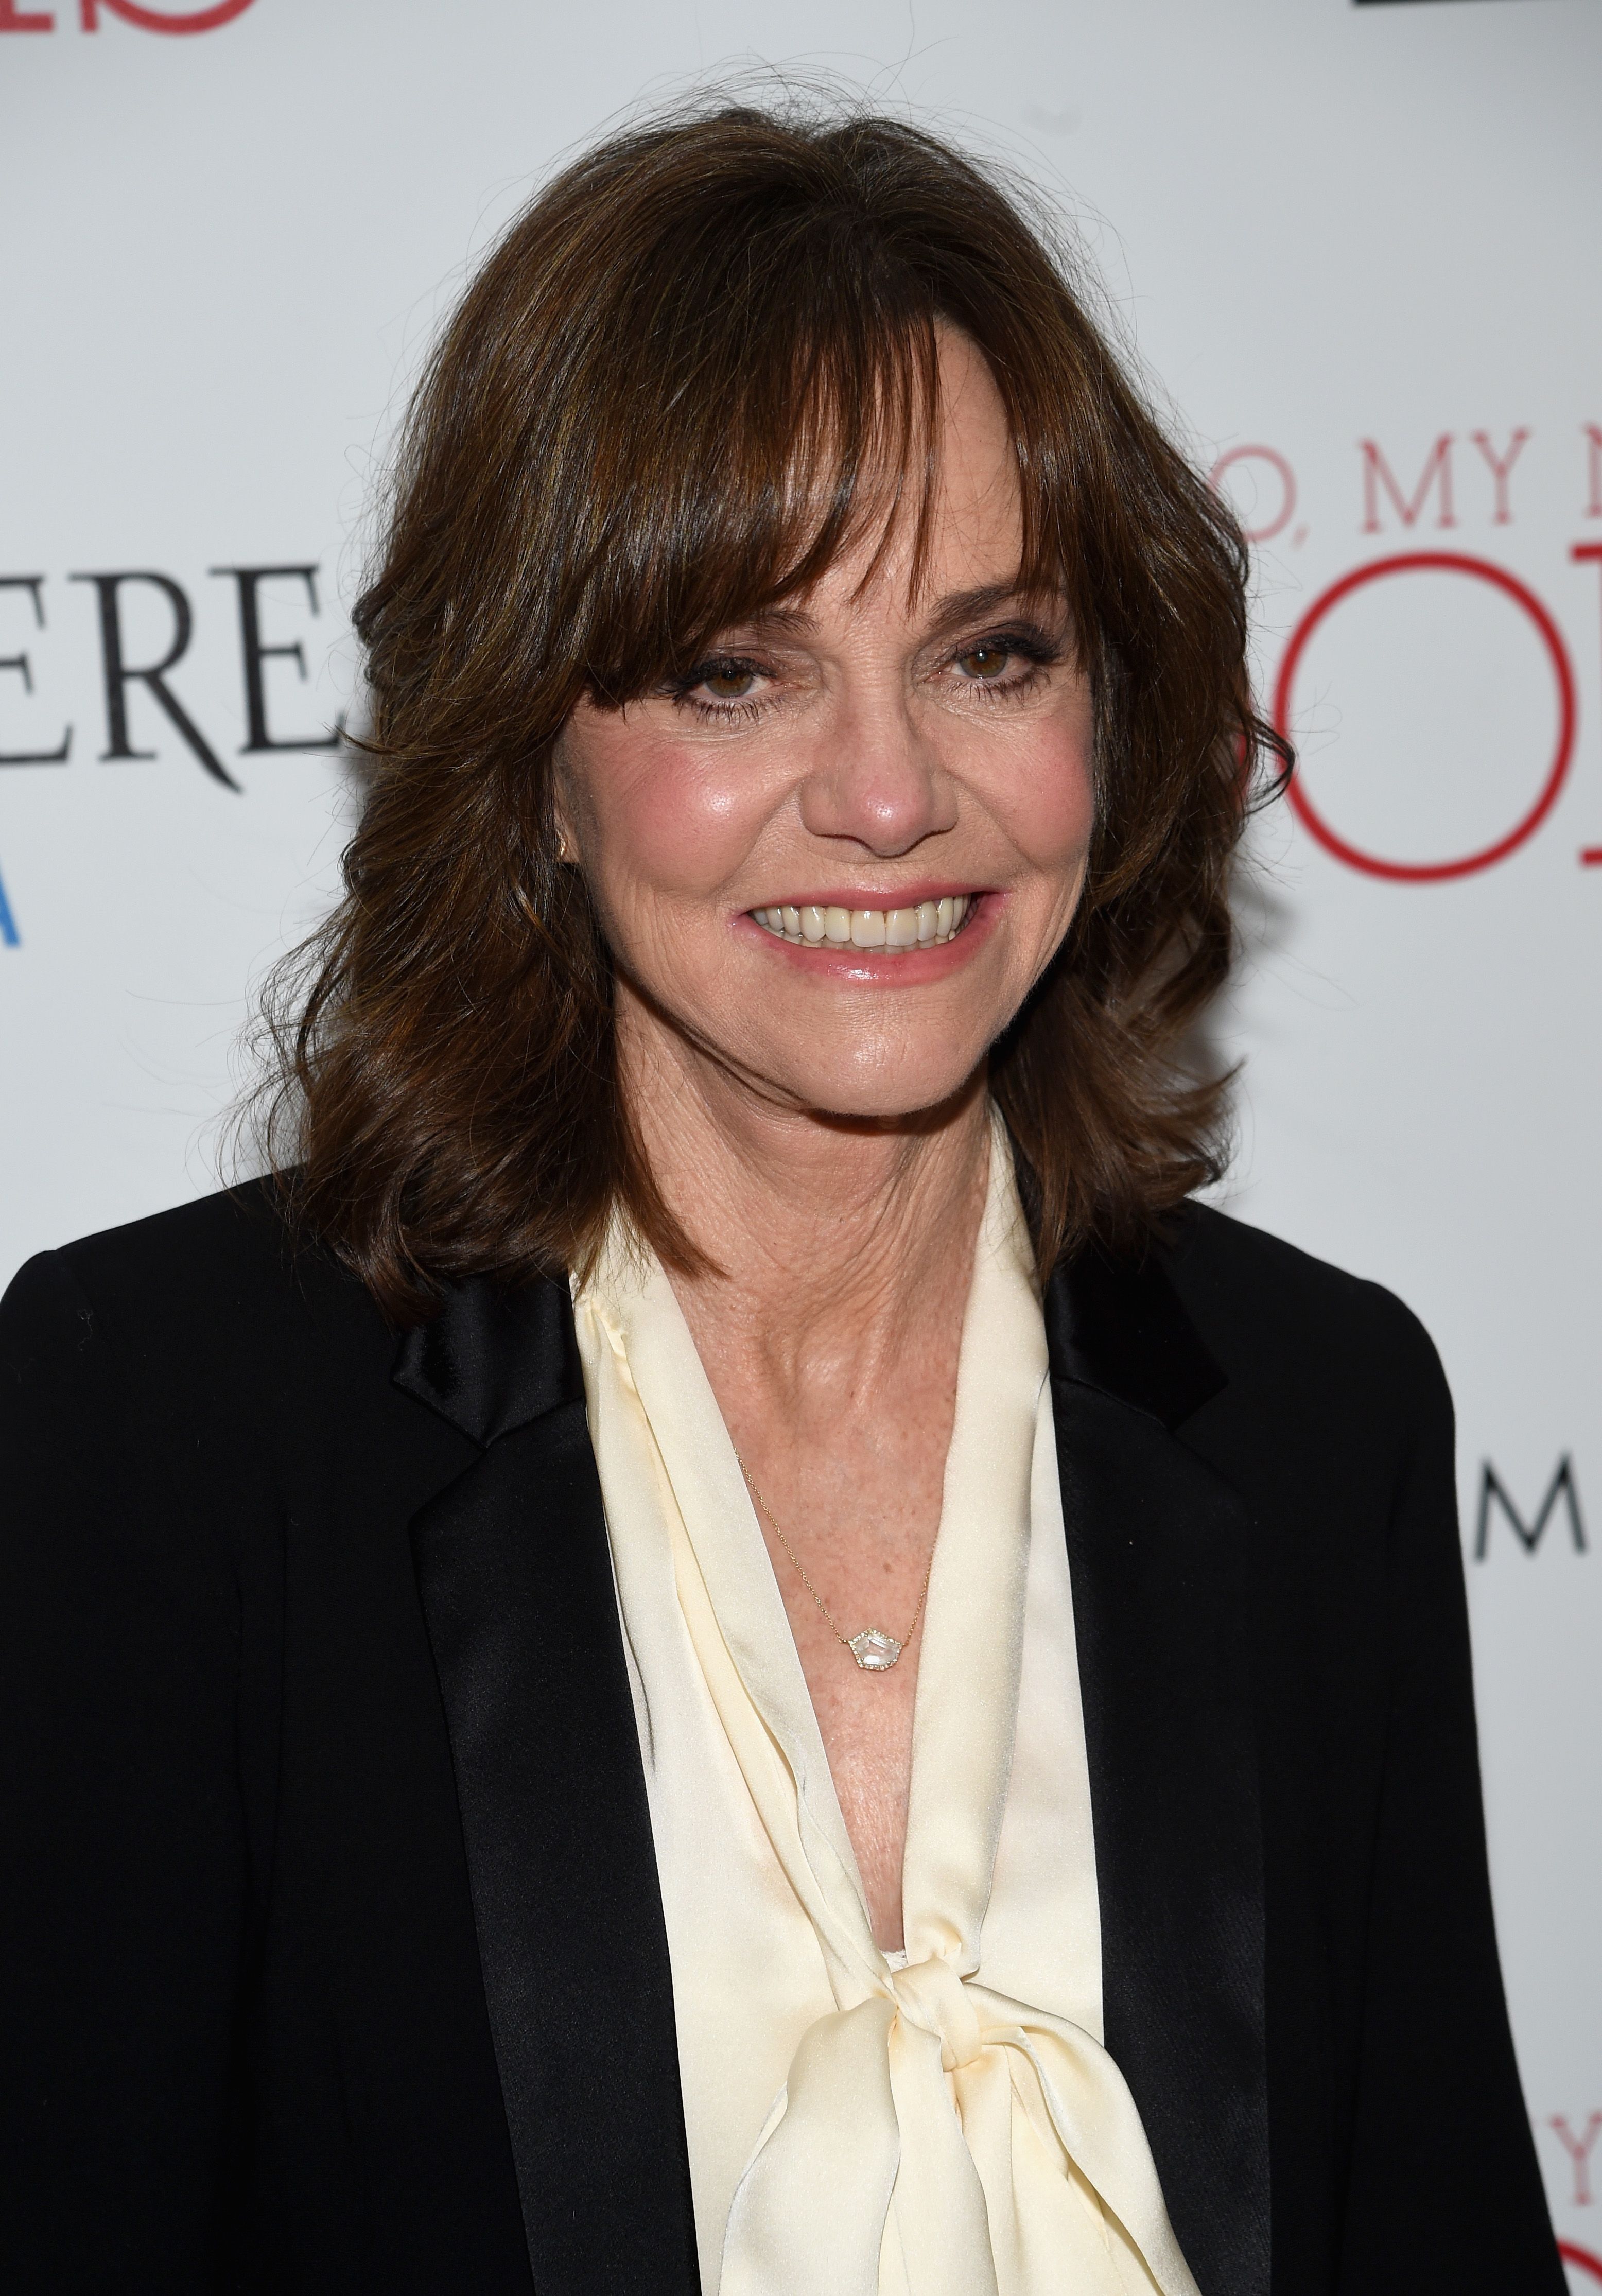 Actress Sally Field arrives at the New York premiere of "Hello, My Name Is Doris" hosted by Roadside Attractions with The Cinema Society & Belvedere Vodka at Metrograph on March 7, 2016 in New York City. | Photo: Getty Images